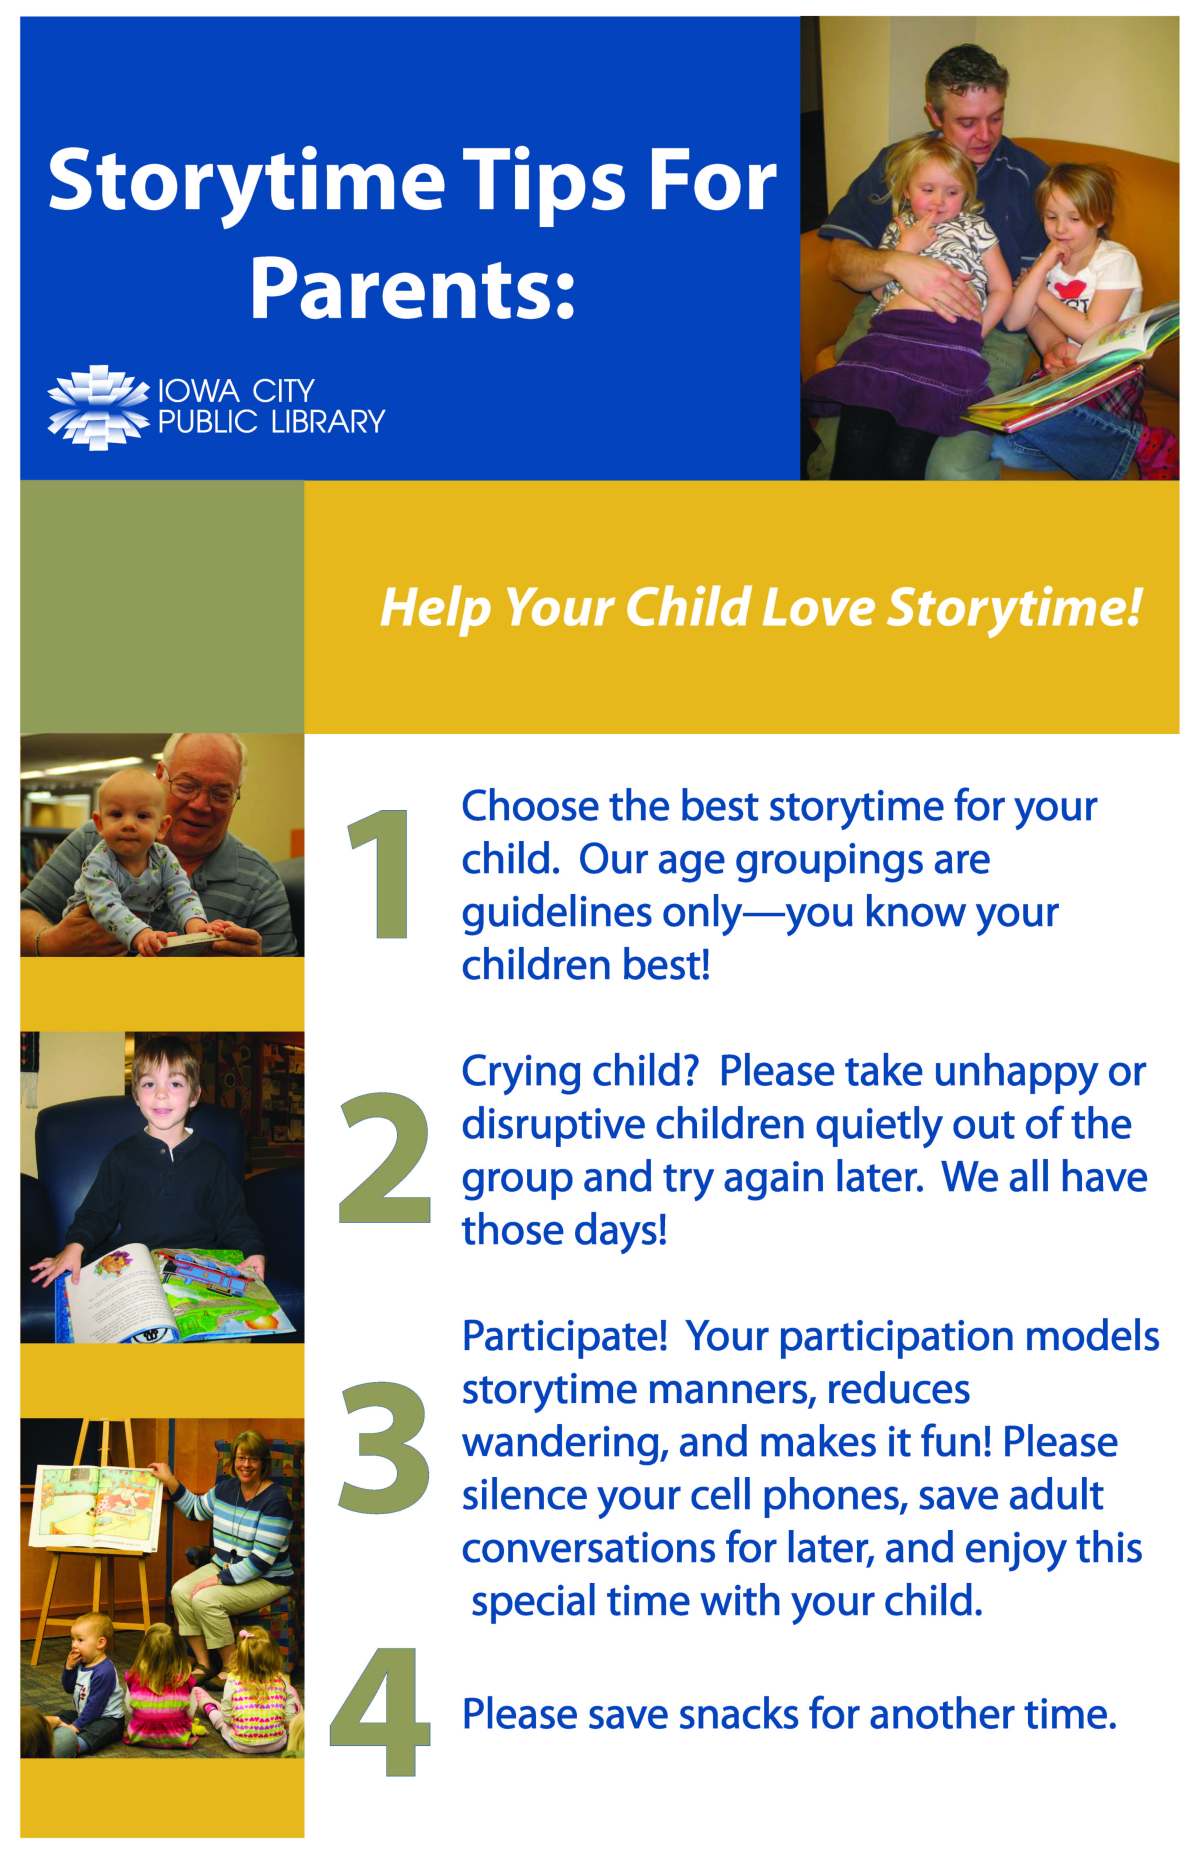 Storytime Tips for Parents large scale version